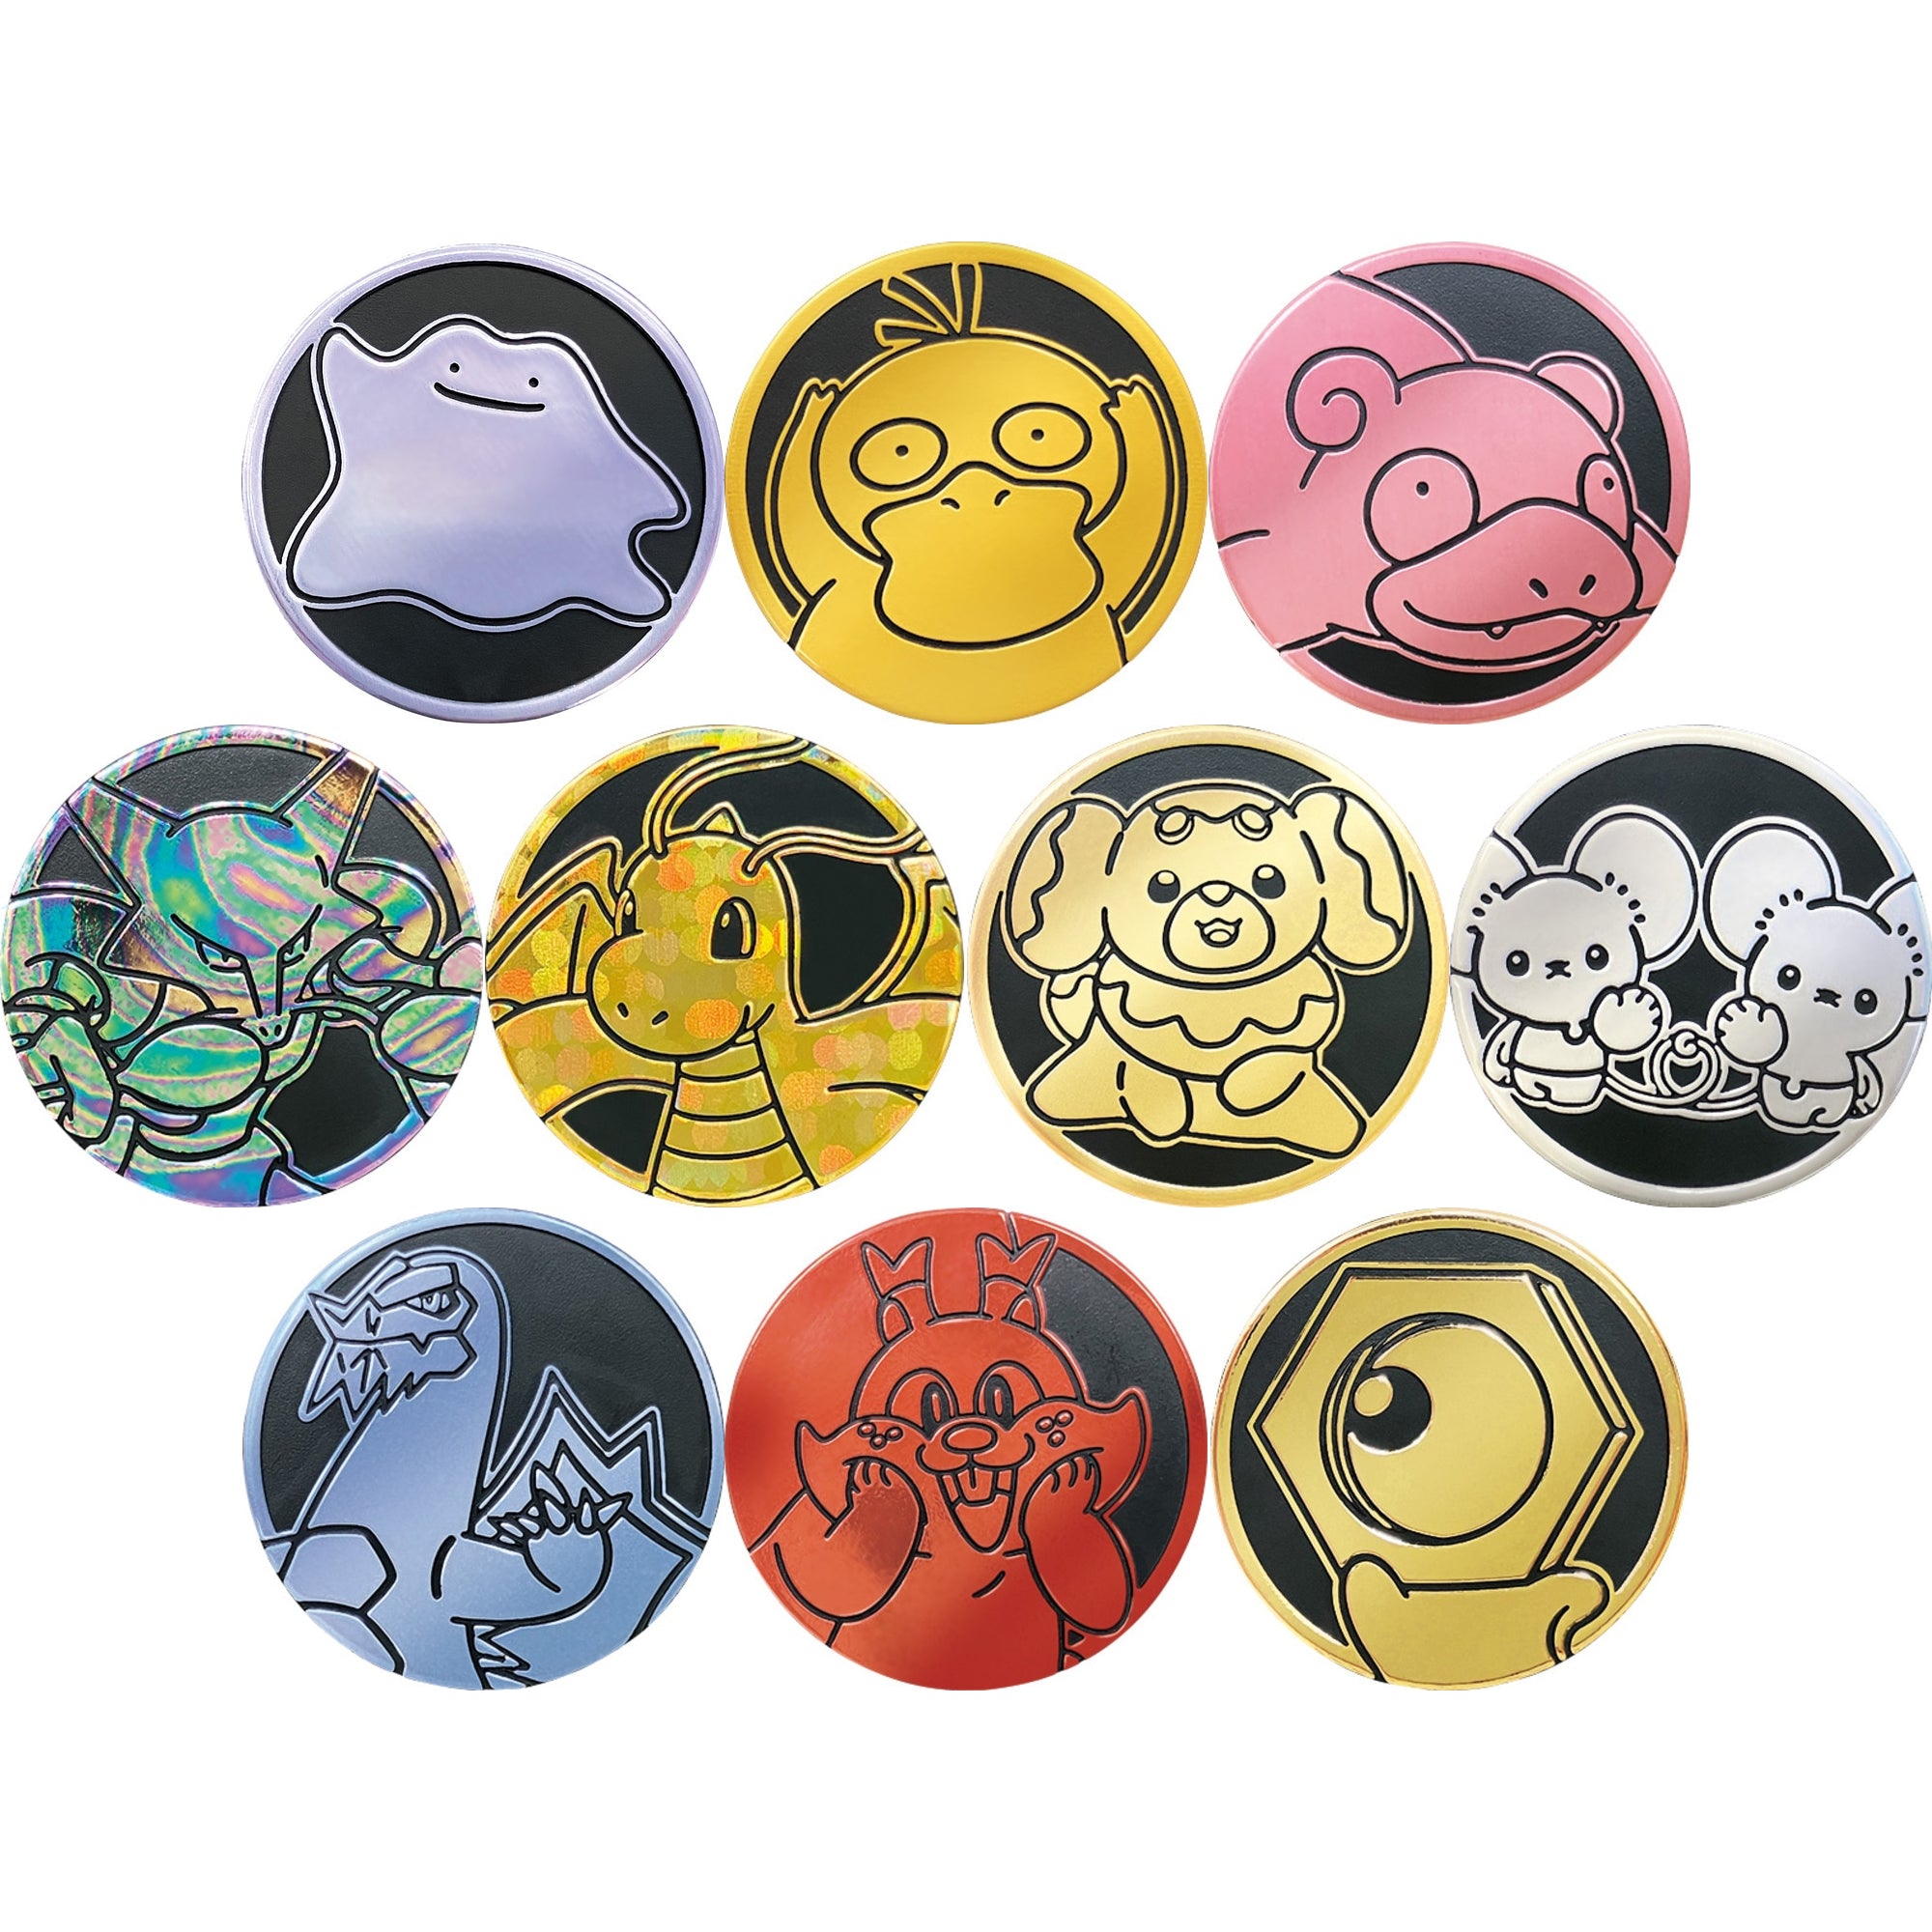 A Peek At The Pokémon Goodies From The Official Pokémon Online